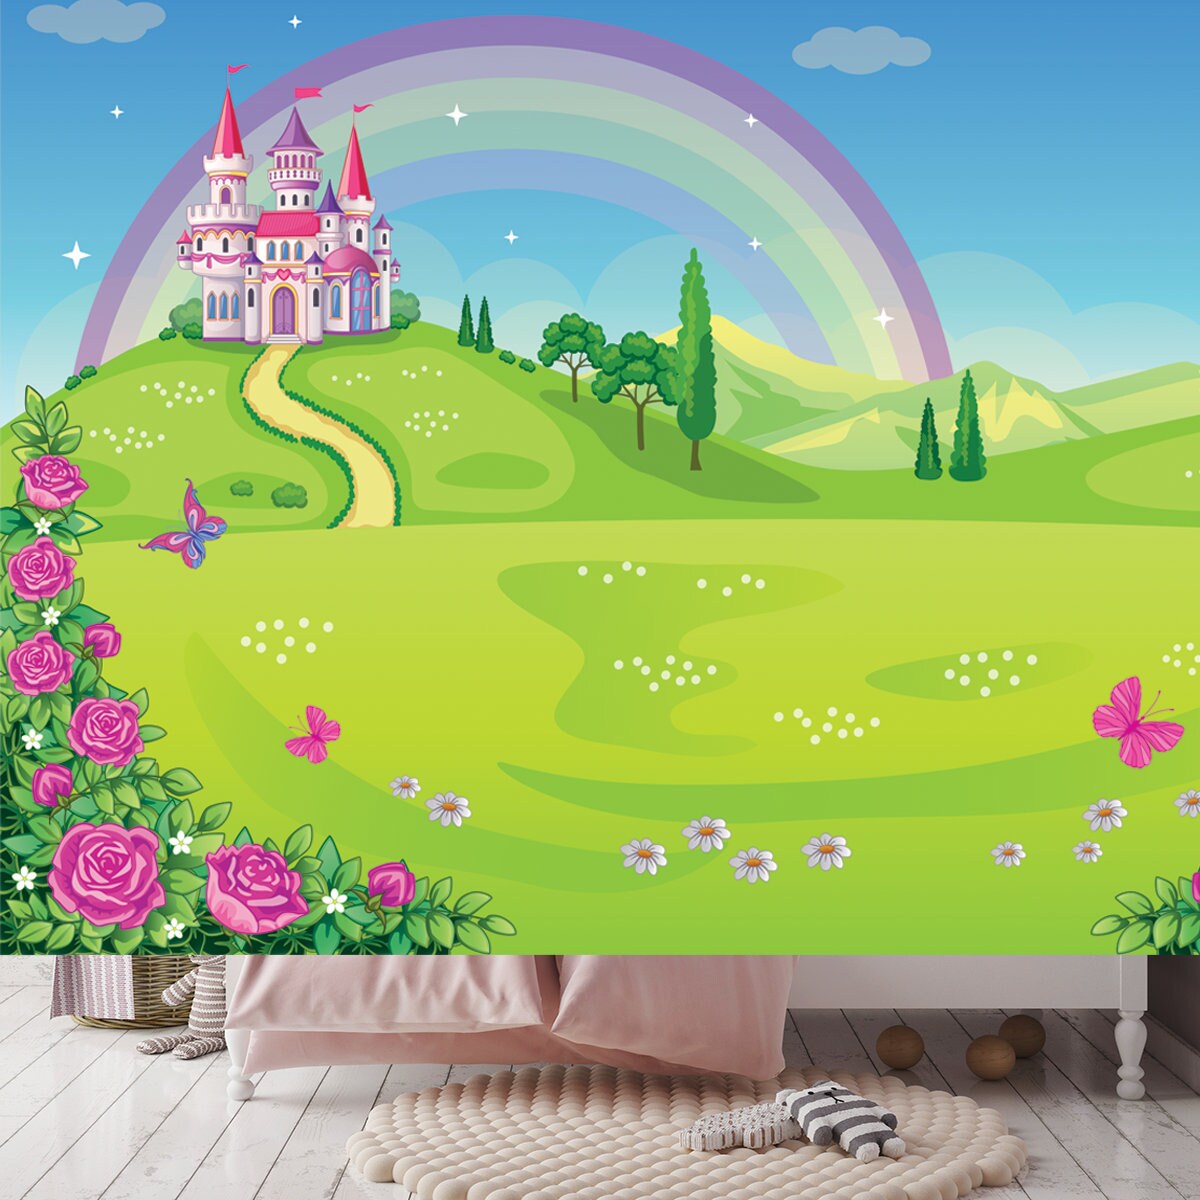 Fairytale Background with Flower Meadow. Princess's Castle and Rainbow. Fabulous Landscape with Butterflies Wallpaper Girls Bedroom Mural